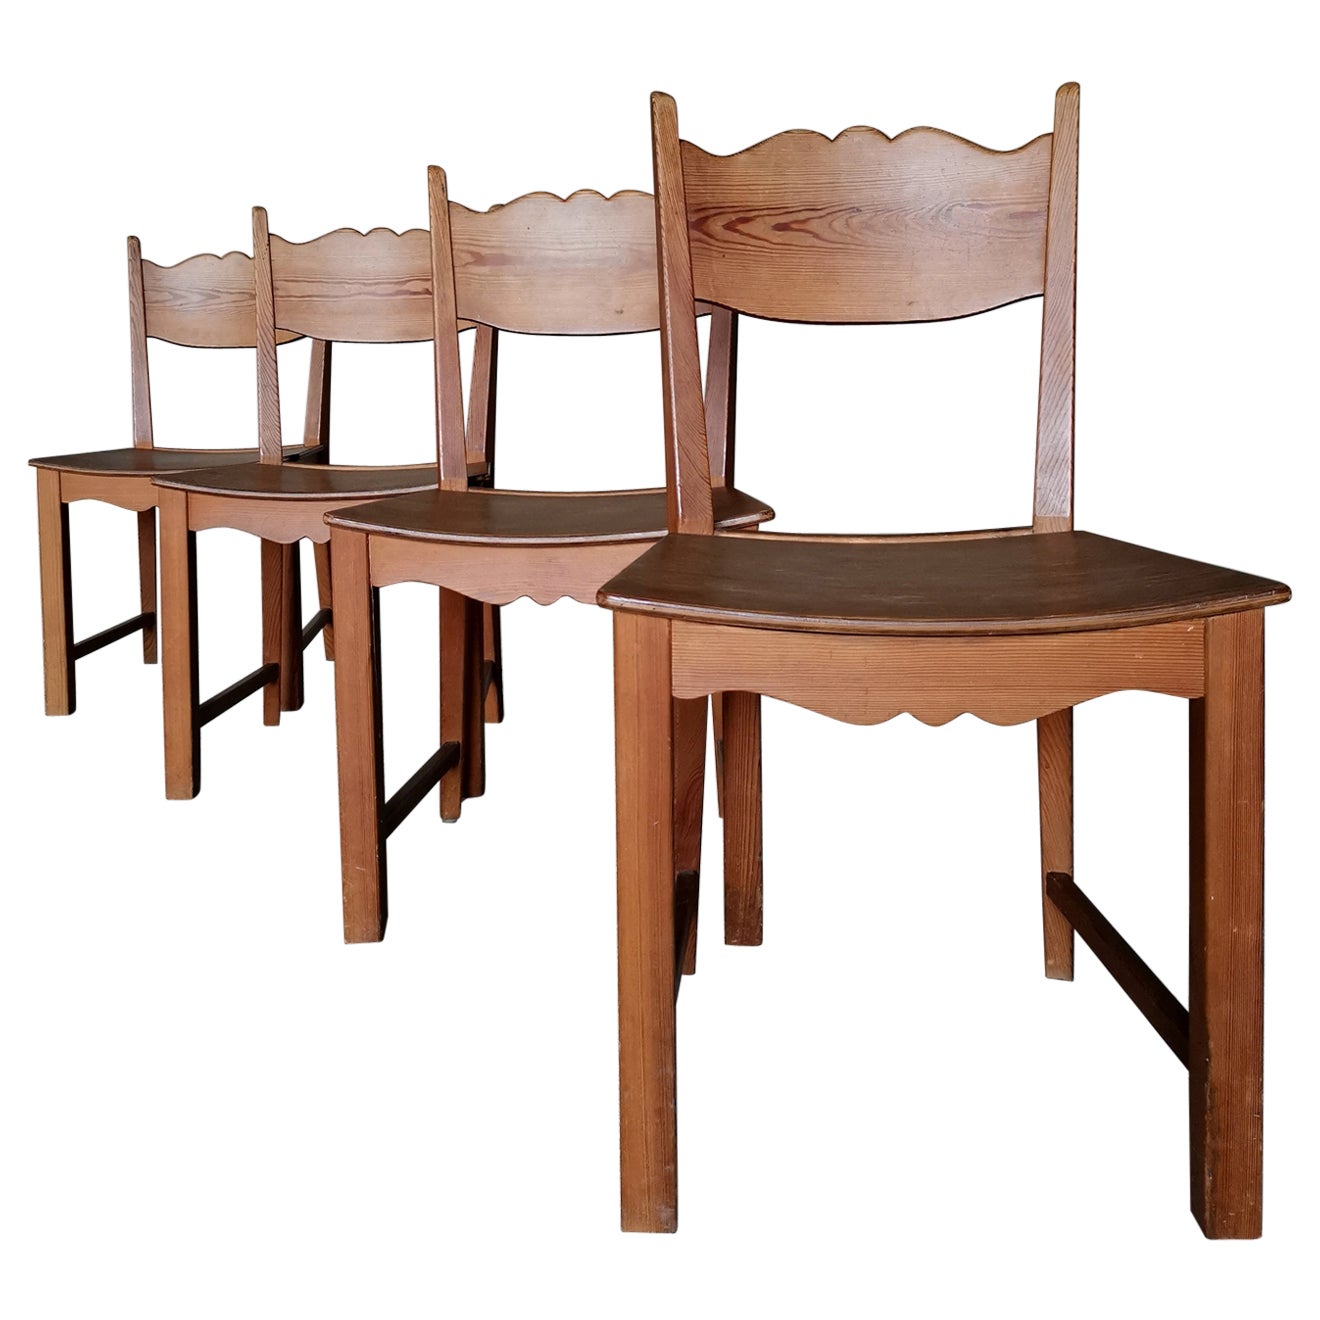 Set of 4 Swedish 1930s dining chairs in solid pine, style of Axel Einar Hjorth 